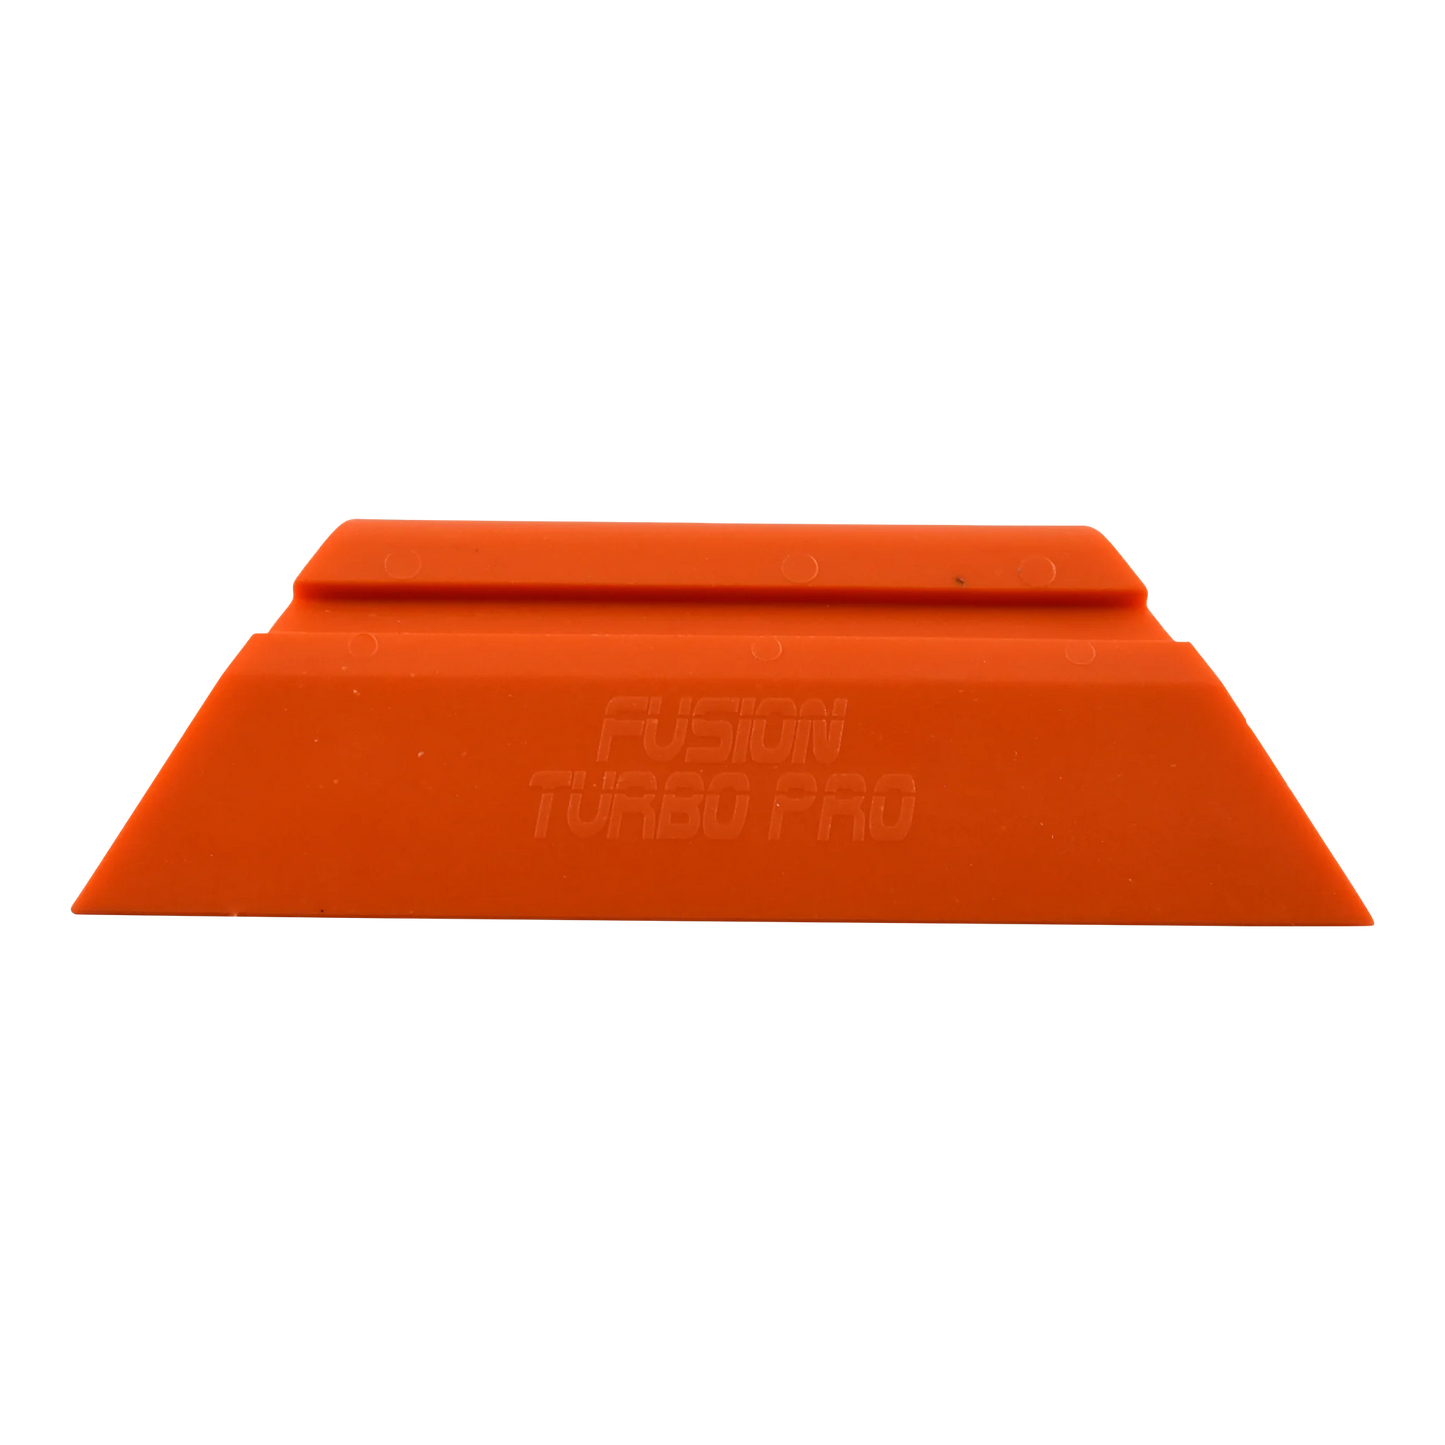 Fusion Turbo Pro Squeegee 5.5" - Enhanced Grip for Precision Application